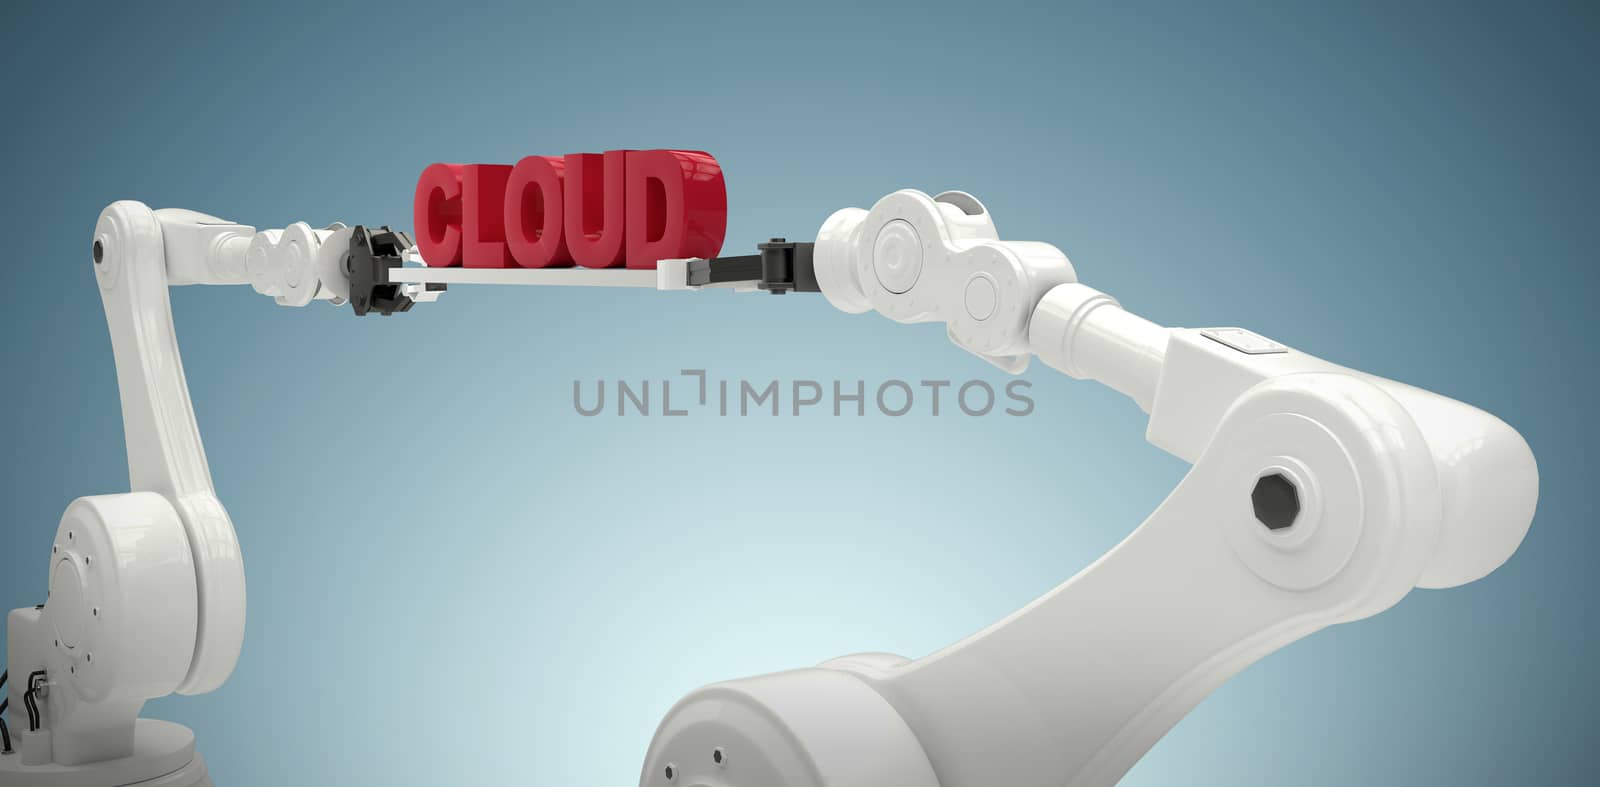 Composite image of robotic hands holding red cloud text against white background by Wavebreakmedia